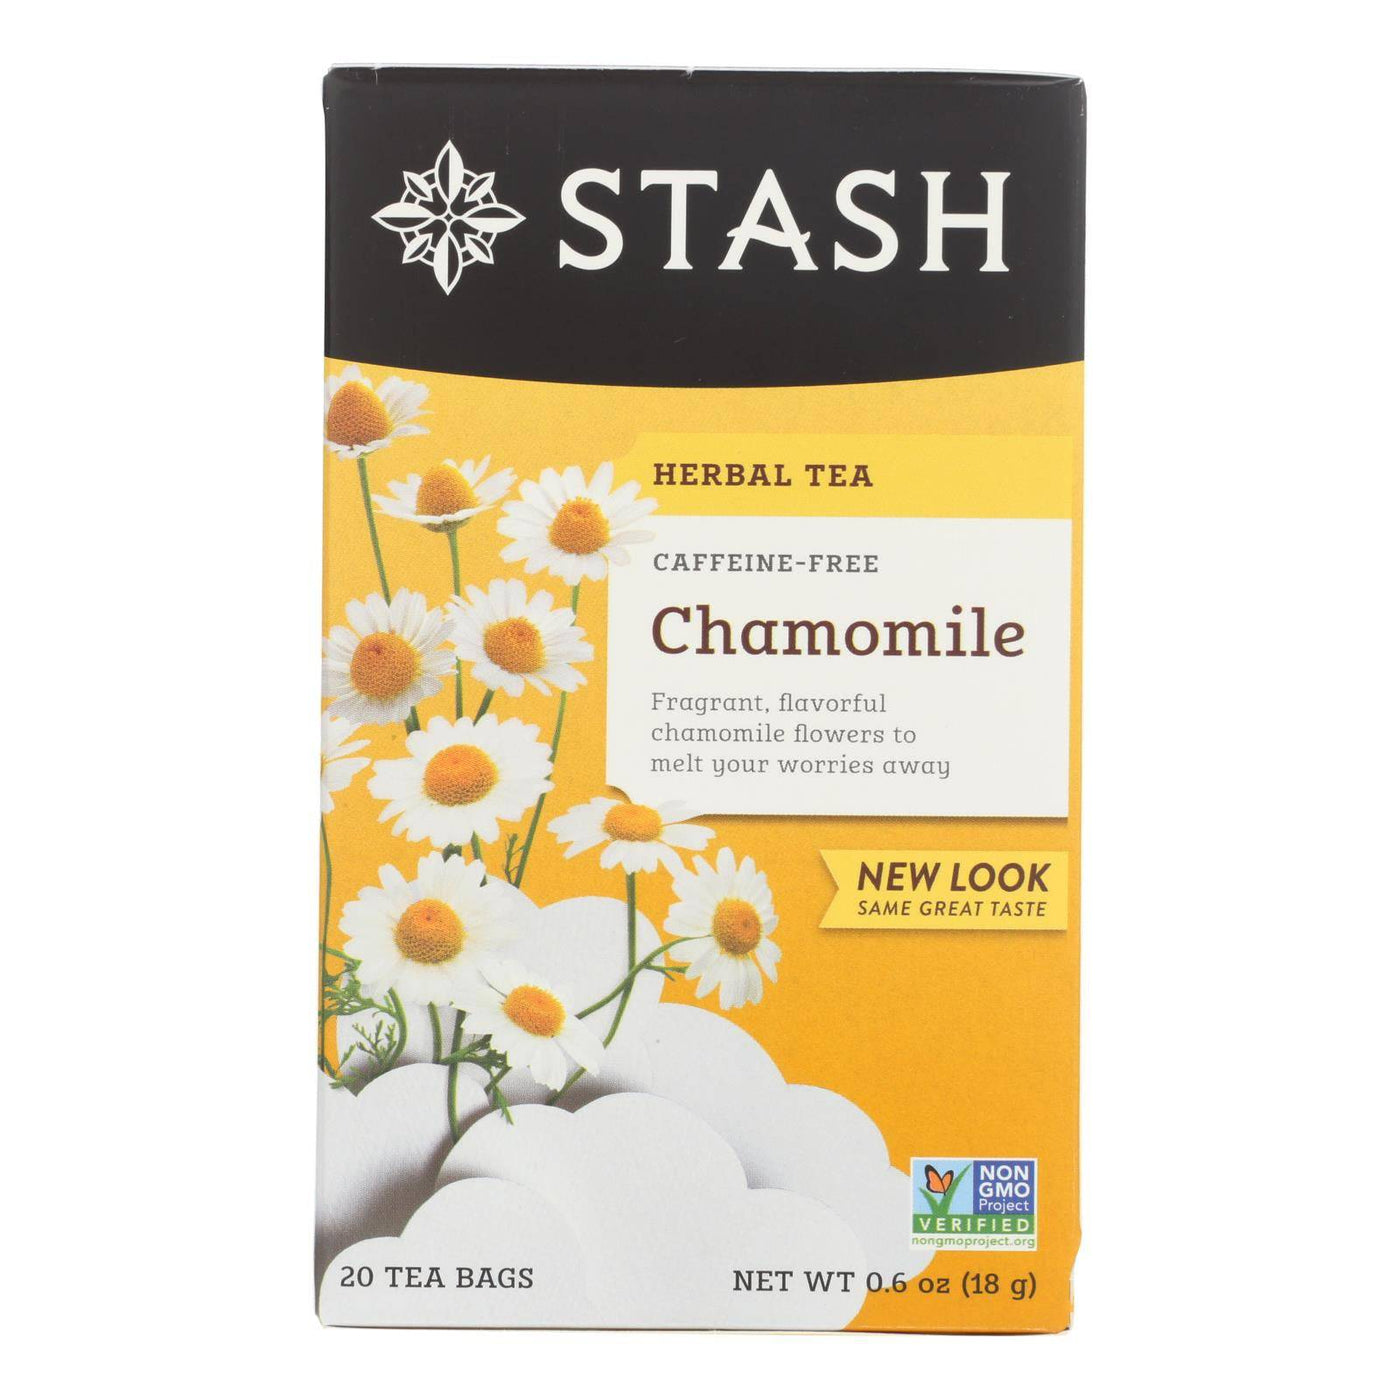 Stash Tea - Herbal - Chamomile - 20 Bags - Case Of 6 | OnlyNaturals.us